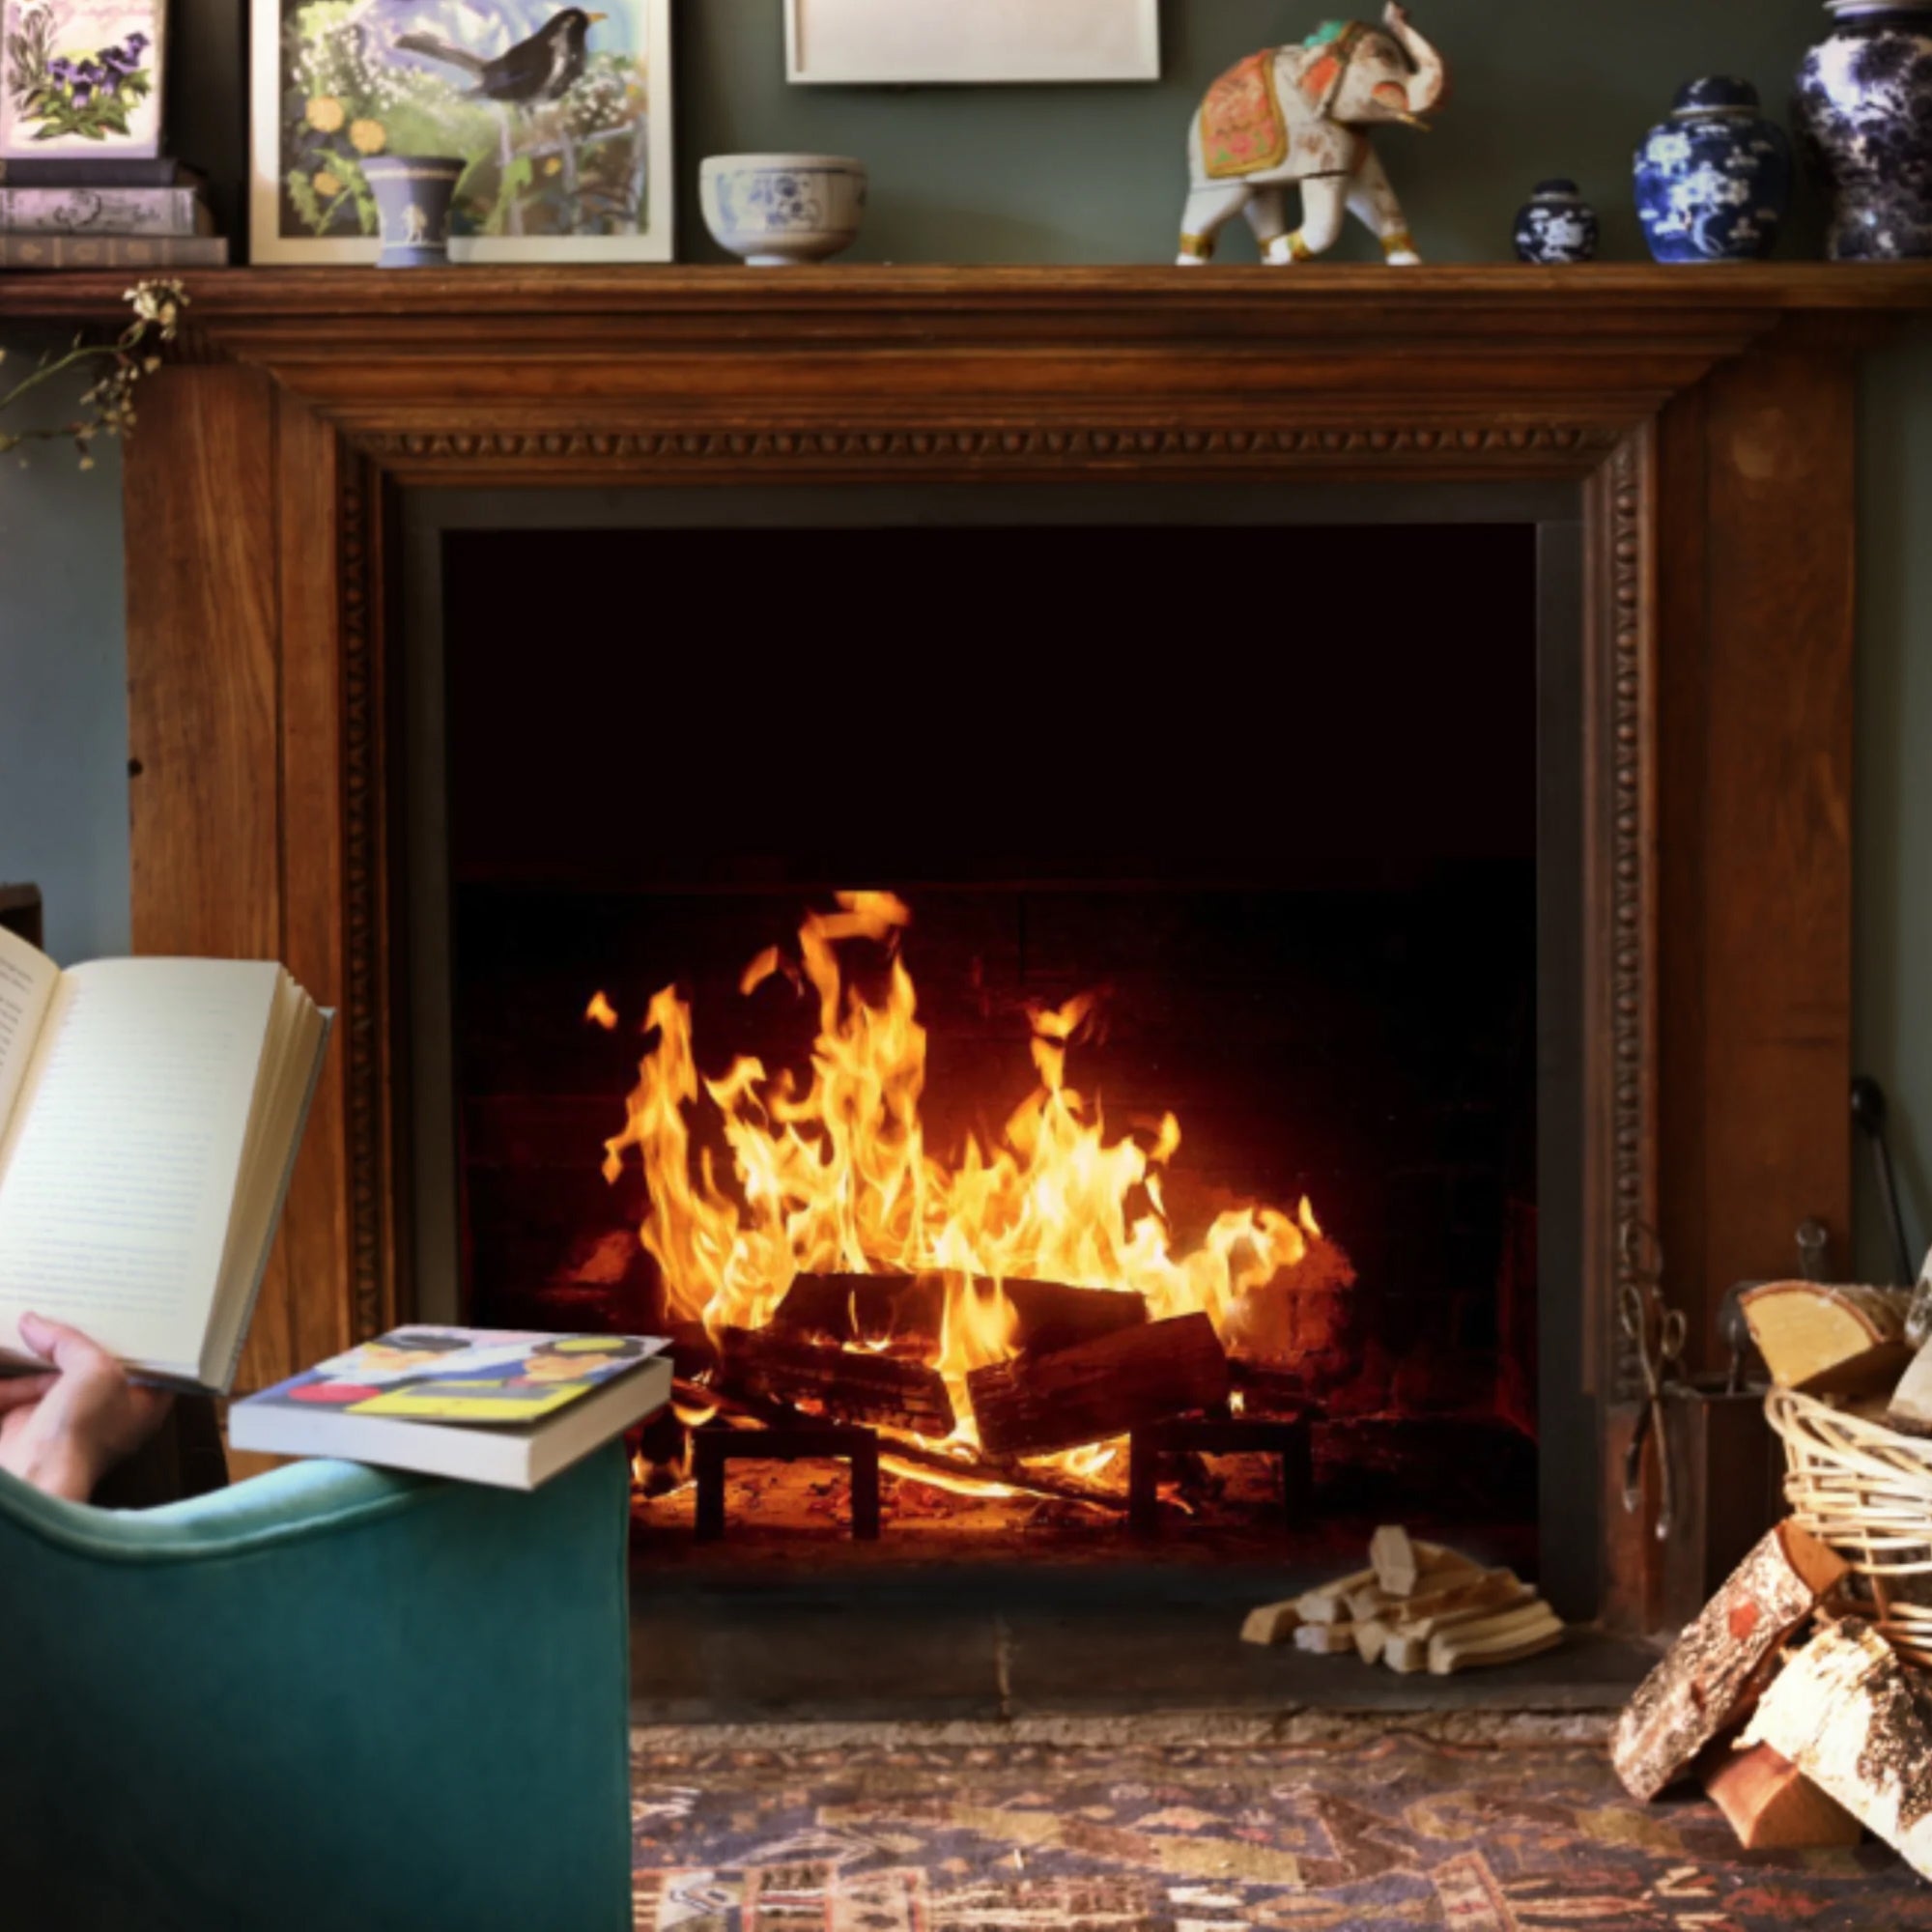 The best wood for fireplaces.